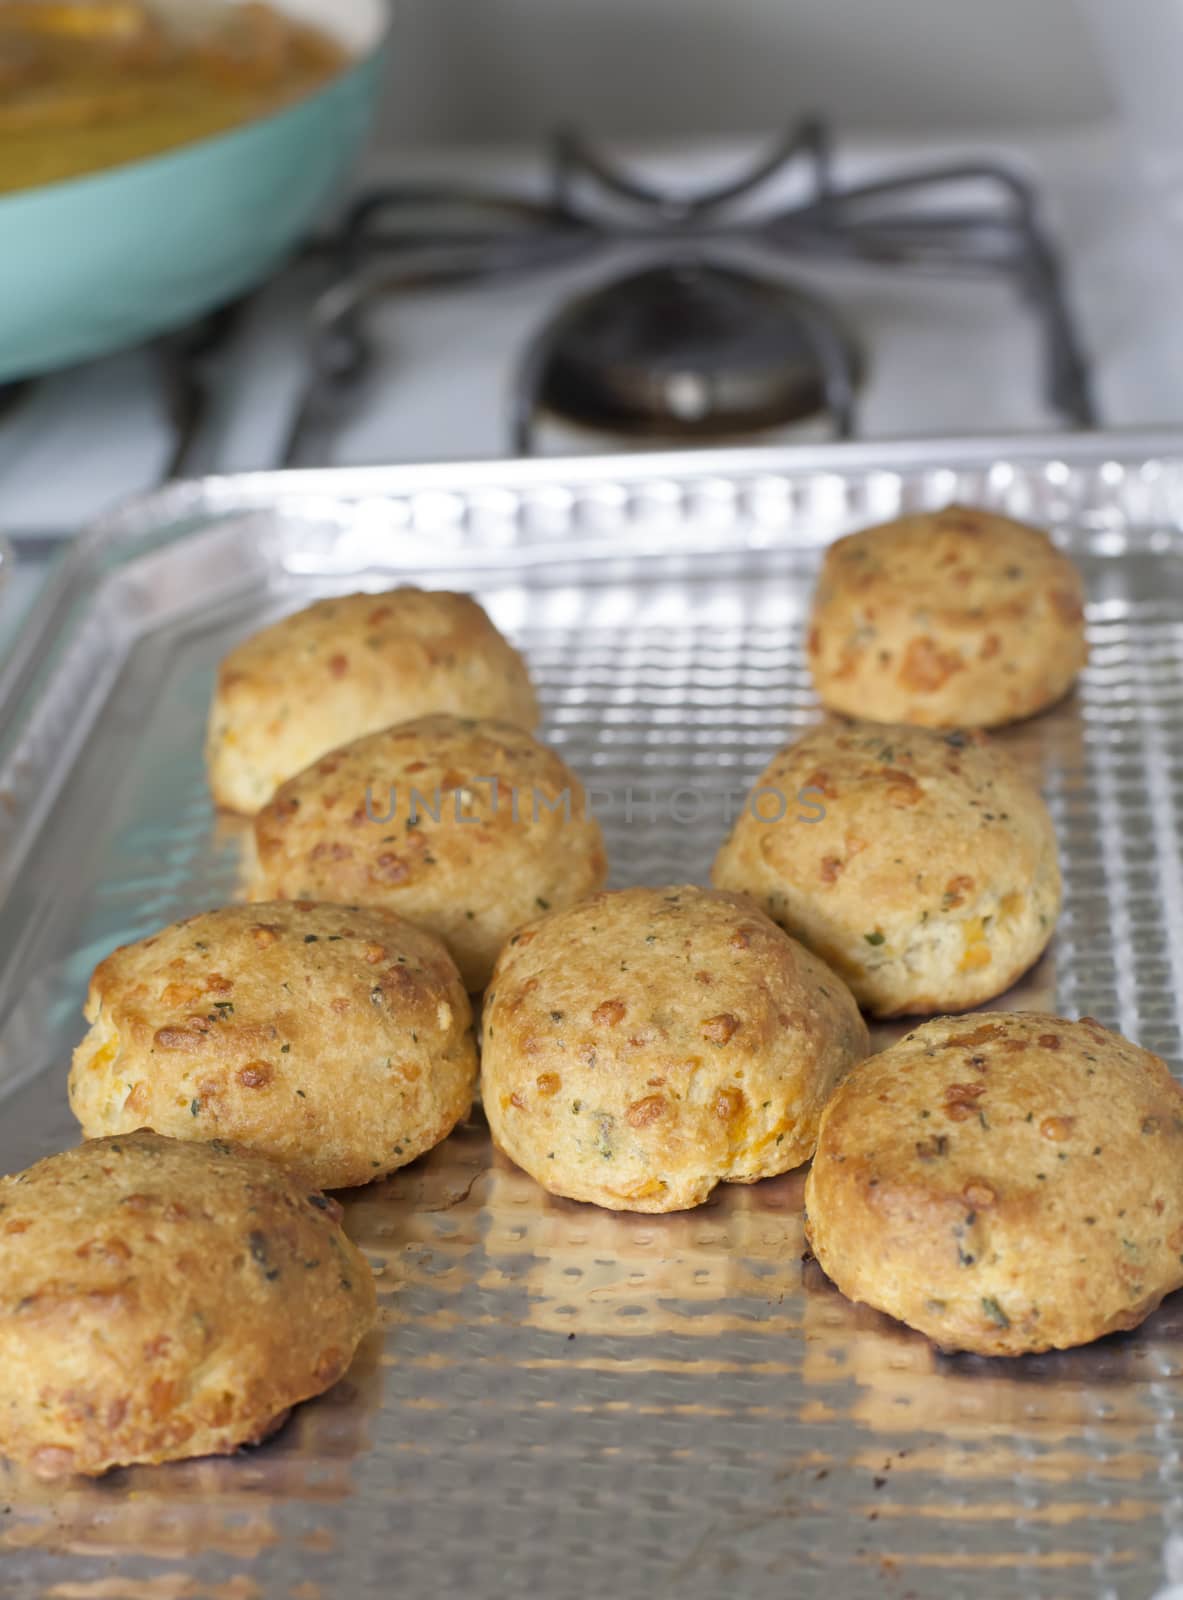 Freshly cooked cheesy biscuits on a baking sheet